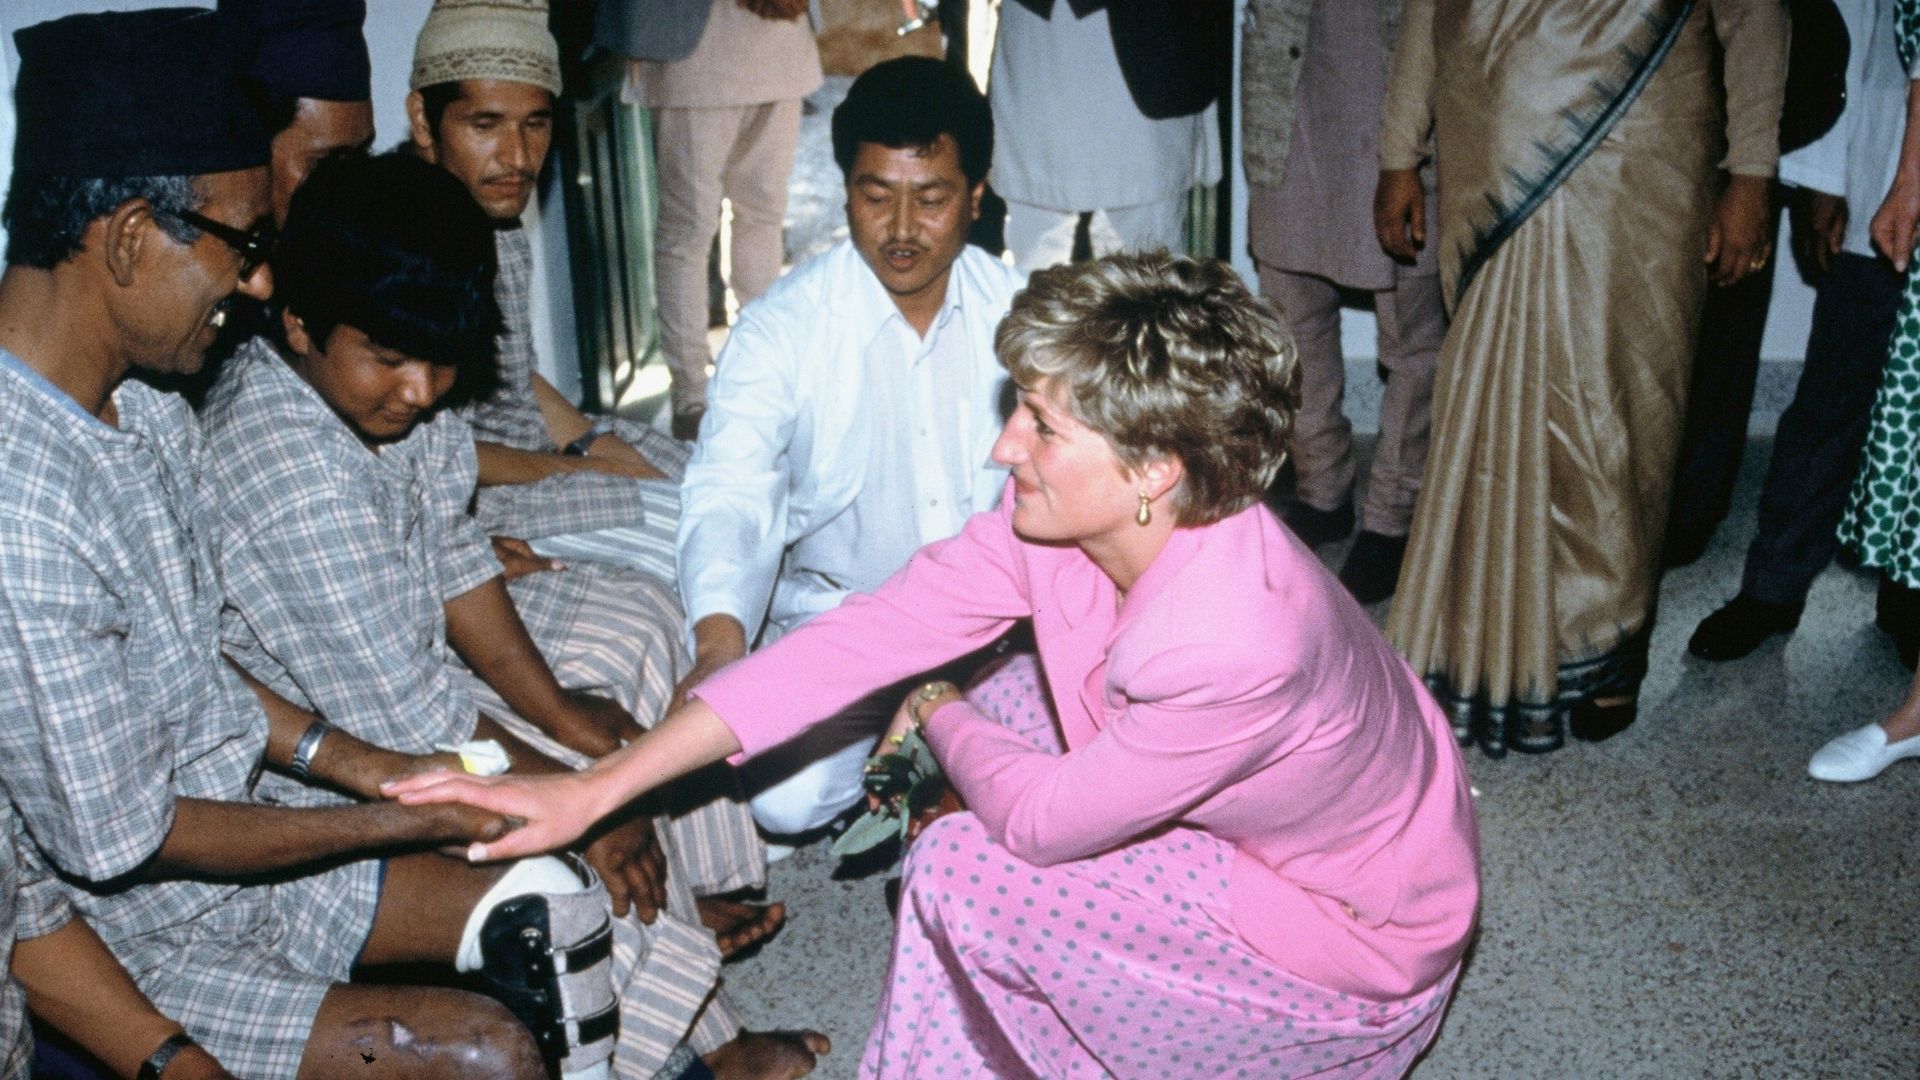 <p>                     Following the official announcement of Prince Charles's and Diana's separation, the first trip she embarked on solo as a single woman was her 1993 official visit to Nepal. Here she visited a leprosy hospital where she met and chatted with patients. During her visit, she was her usual compassionate self and ended up being one of the first dignitaries the patients had ever touched.                   </p>